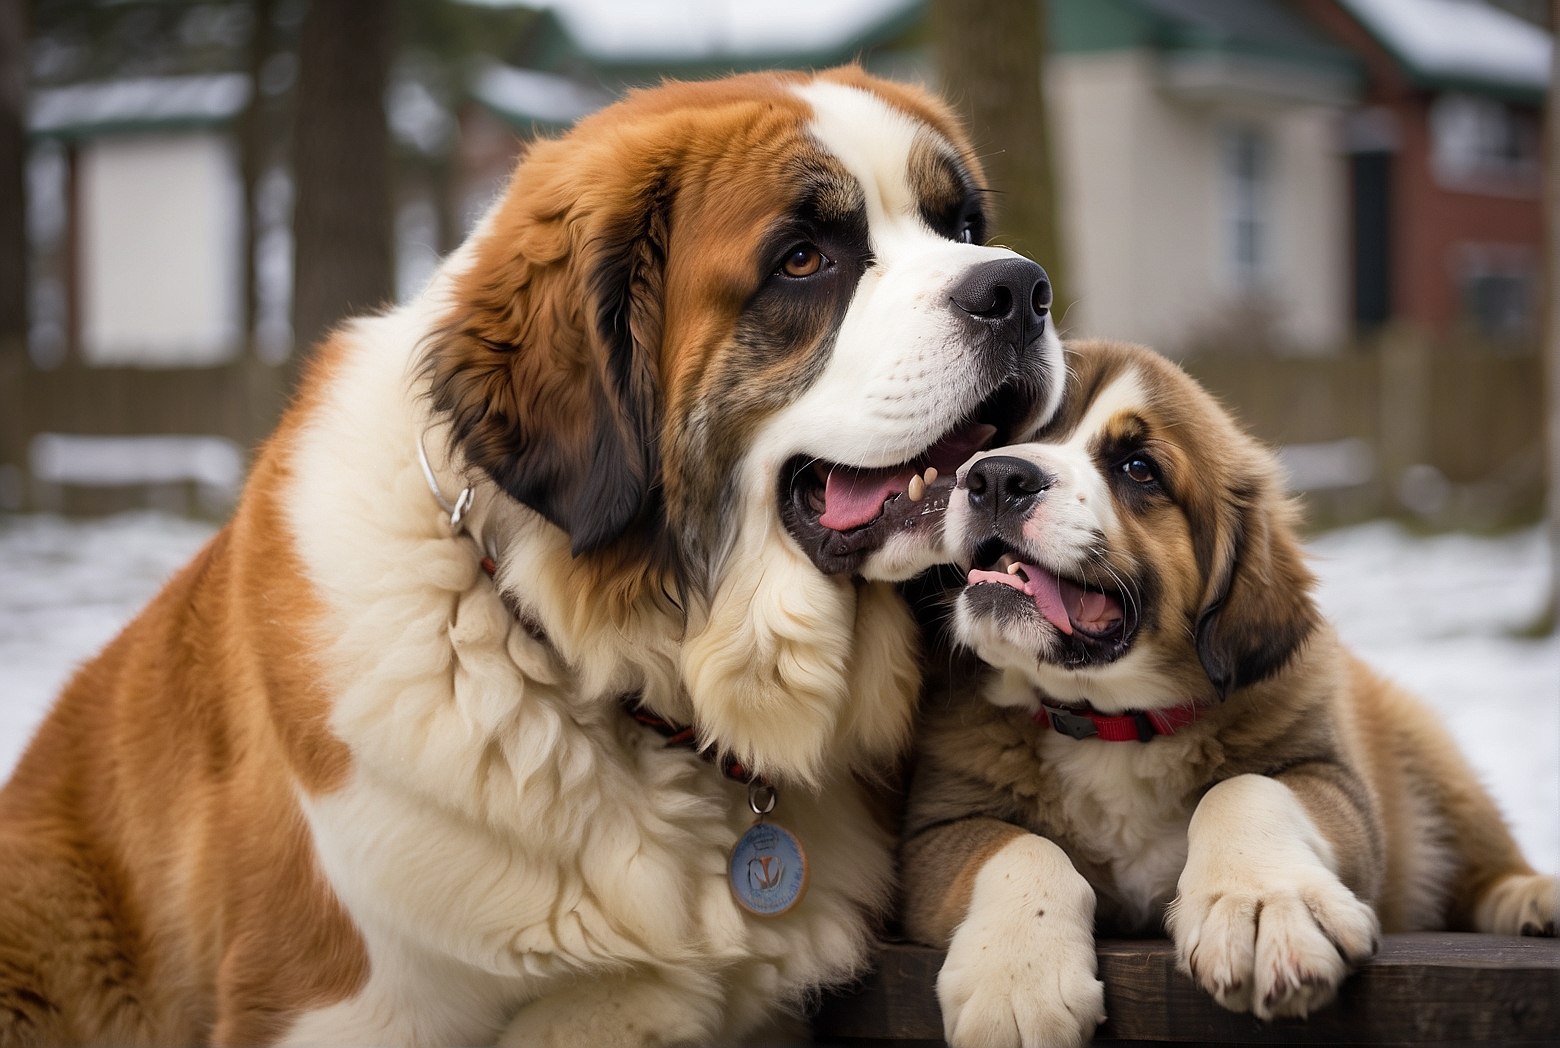 Why Does My Saint Bernard Lick Me So Much?